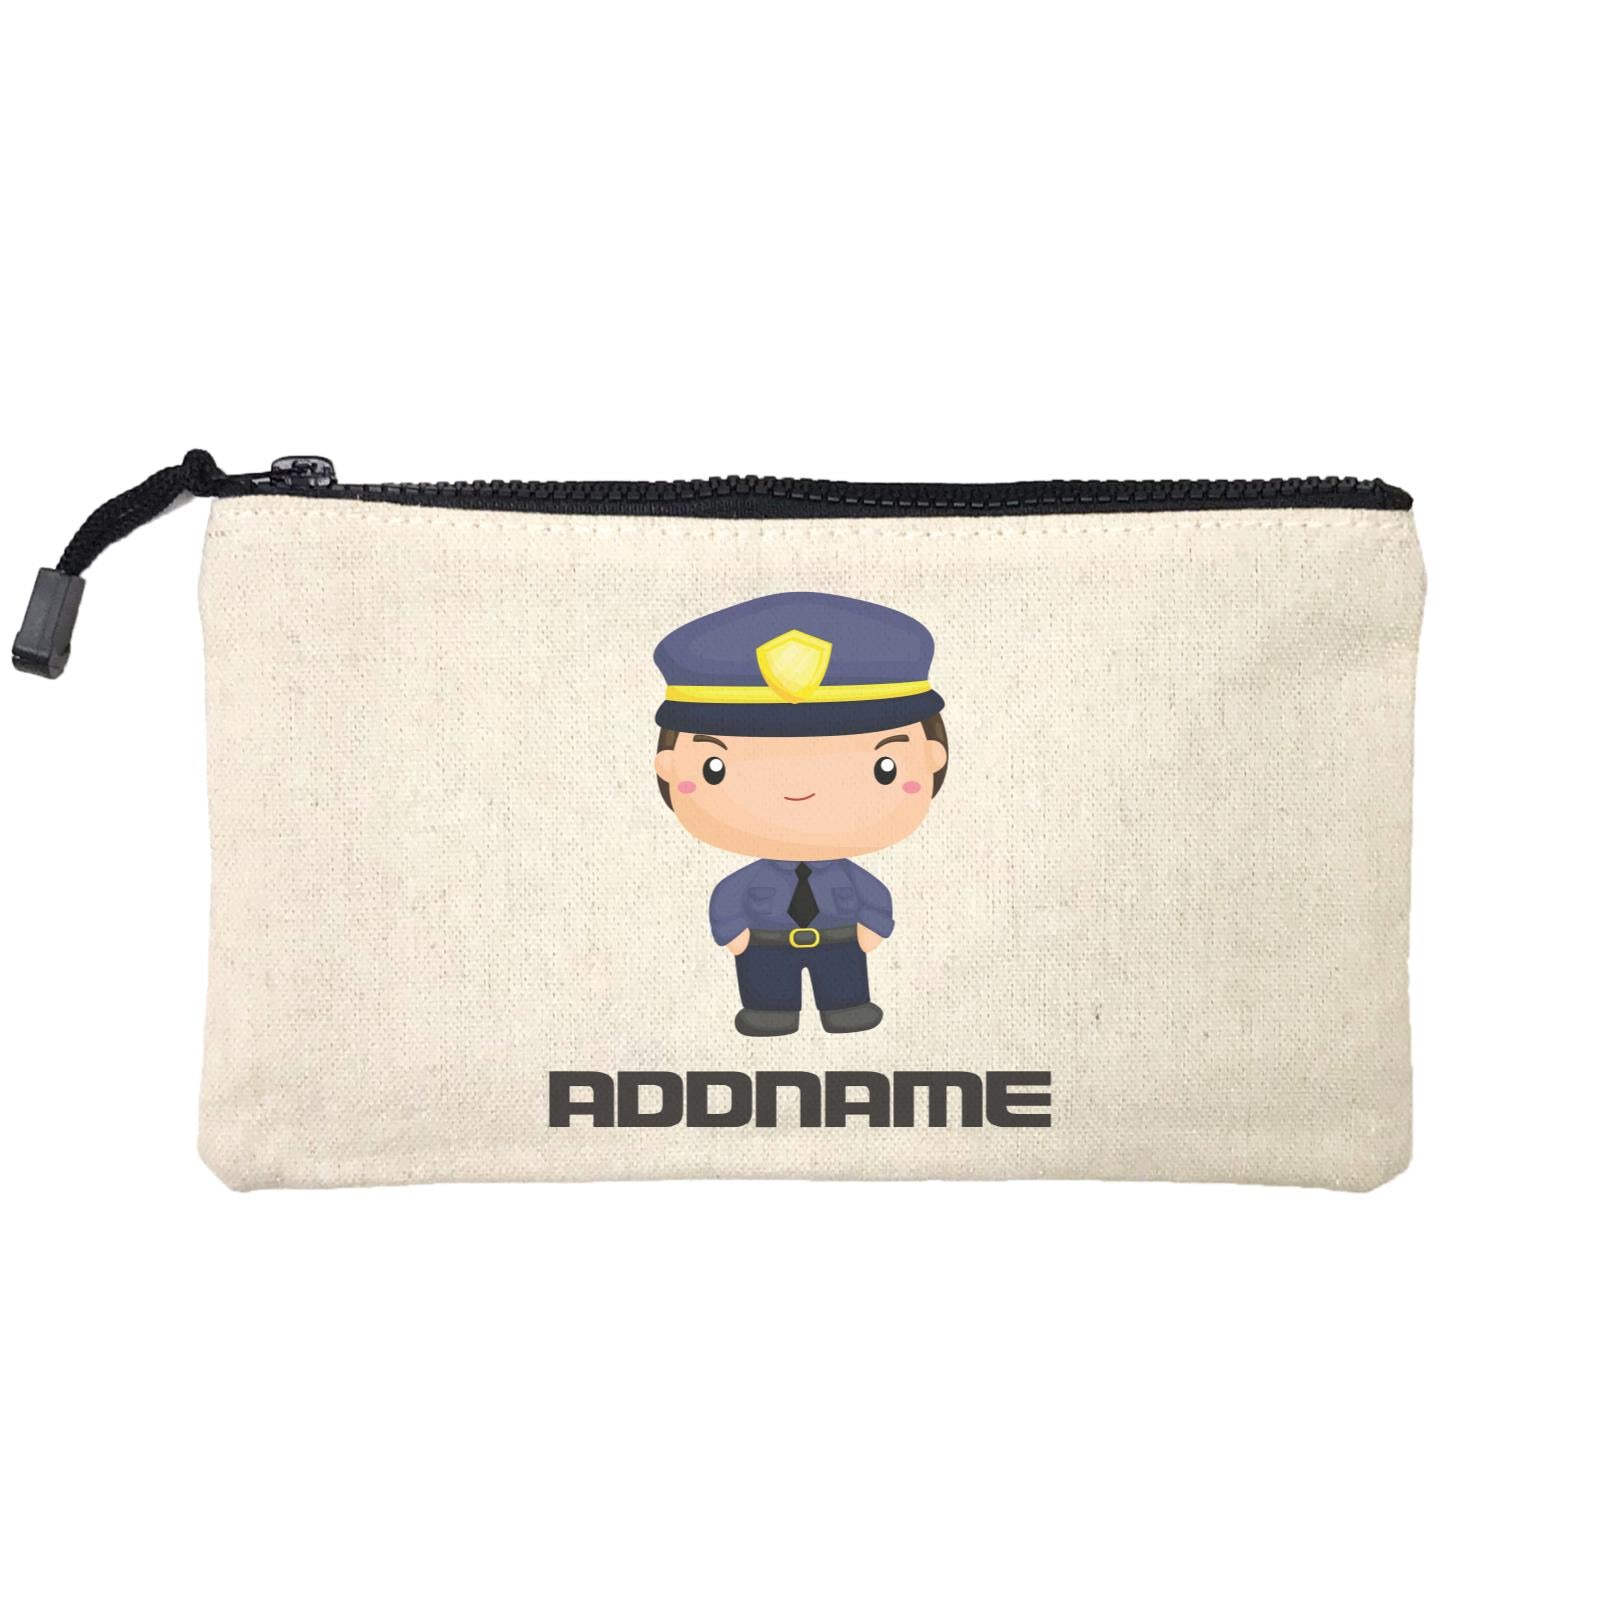 Birthday Police Officer Serious Boy In Suit Addname Mini Accessories Stationery Pouch